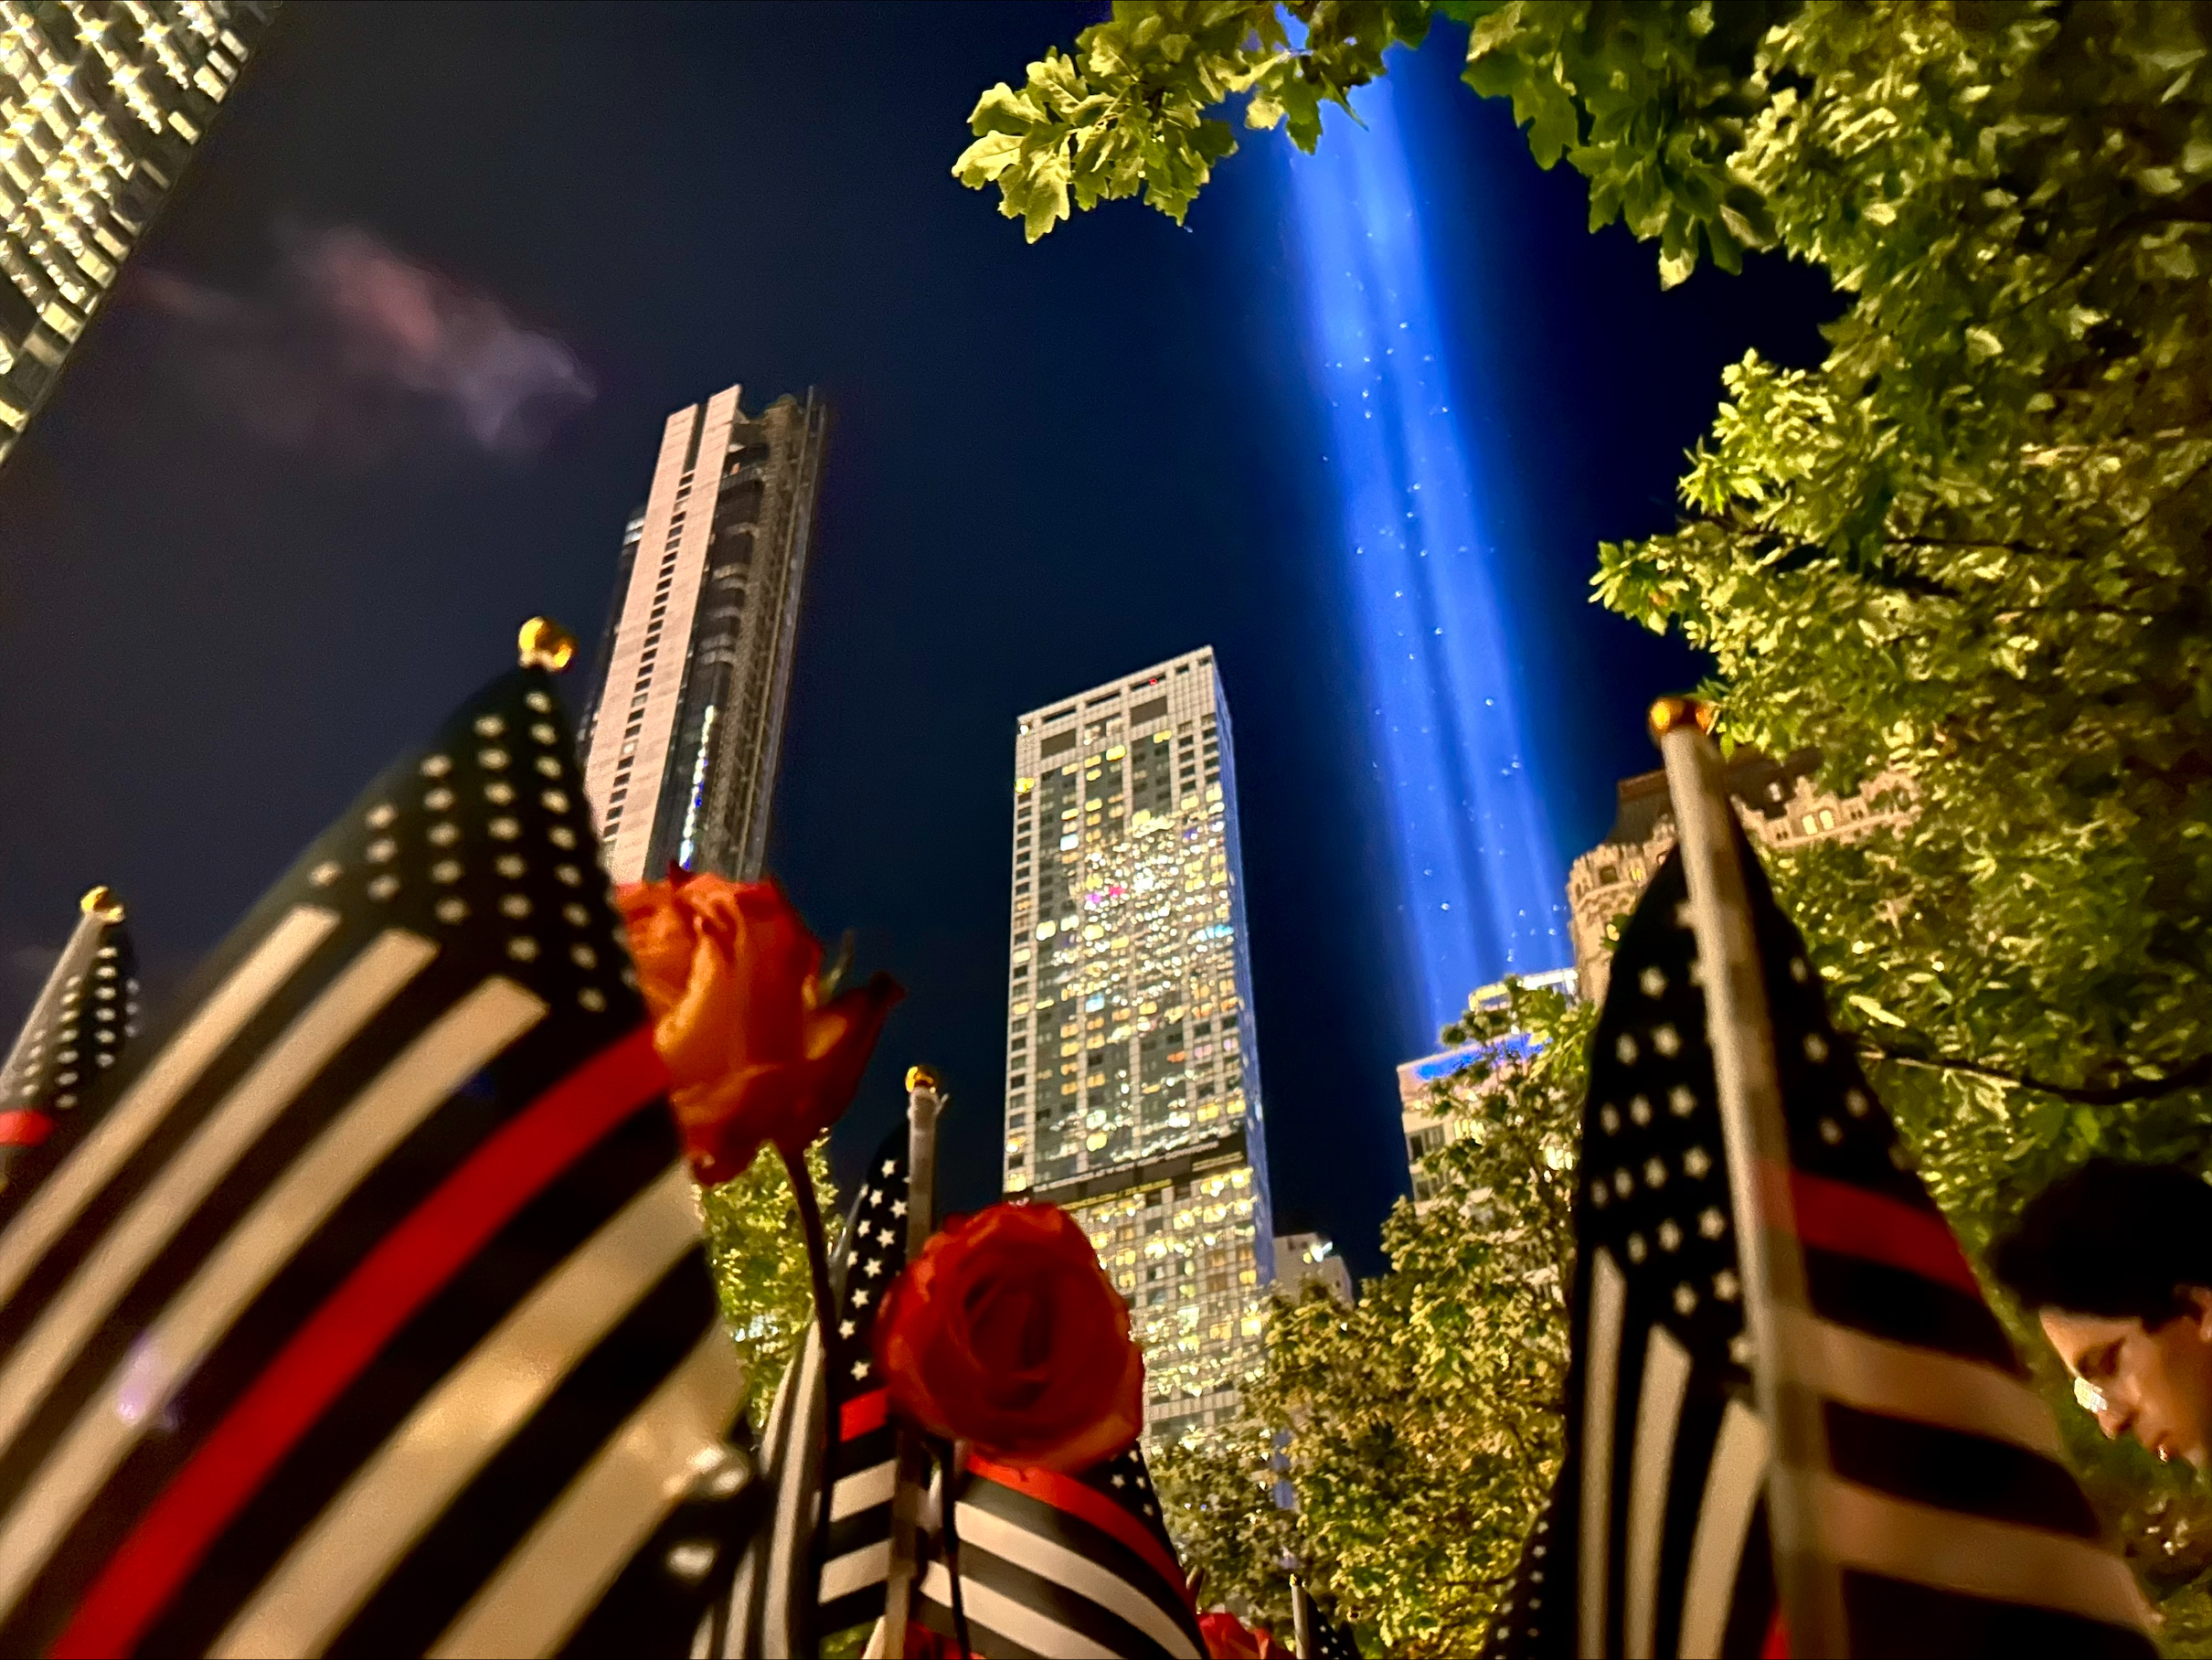 Flowers, flags and lights display... Grit of New York city during 9/11 anniversary